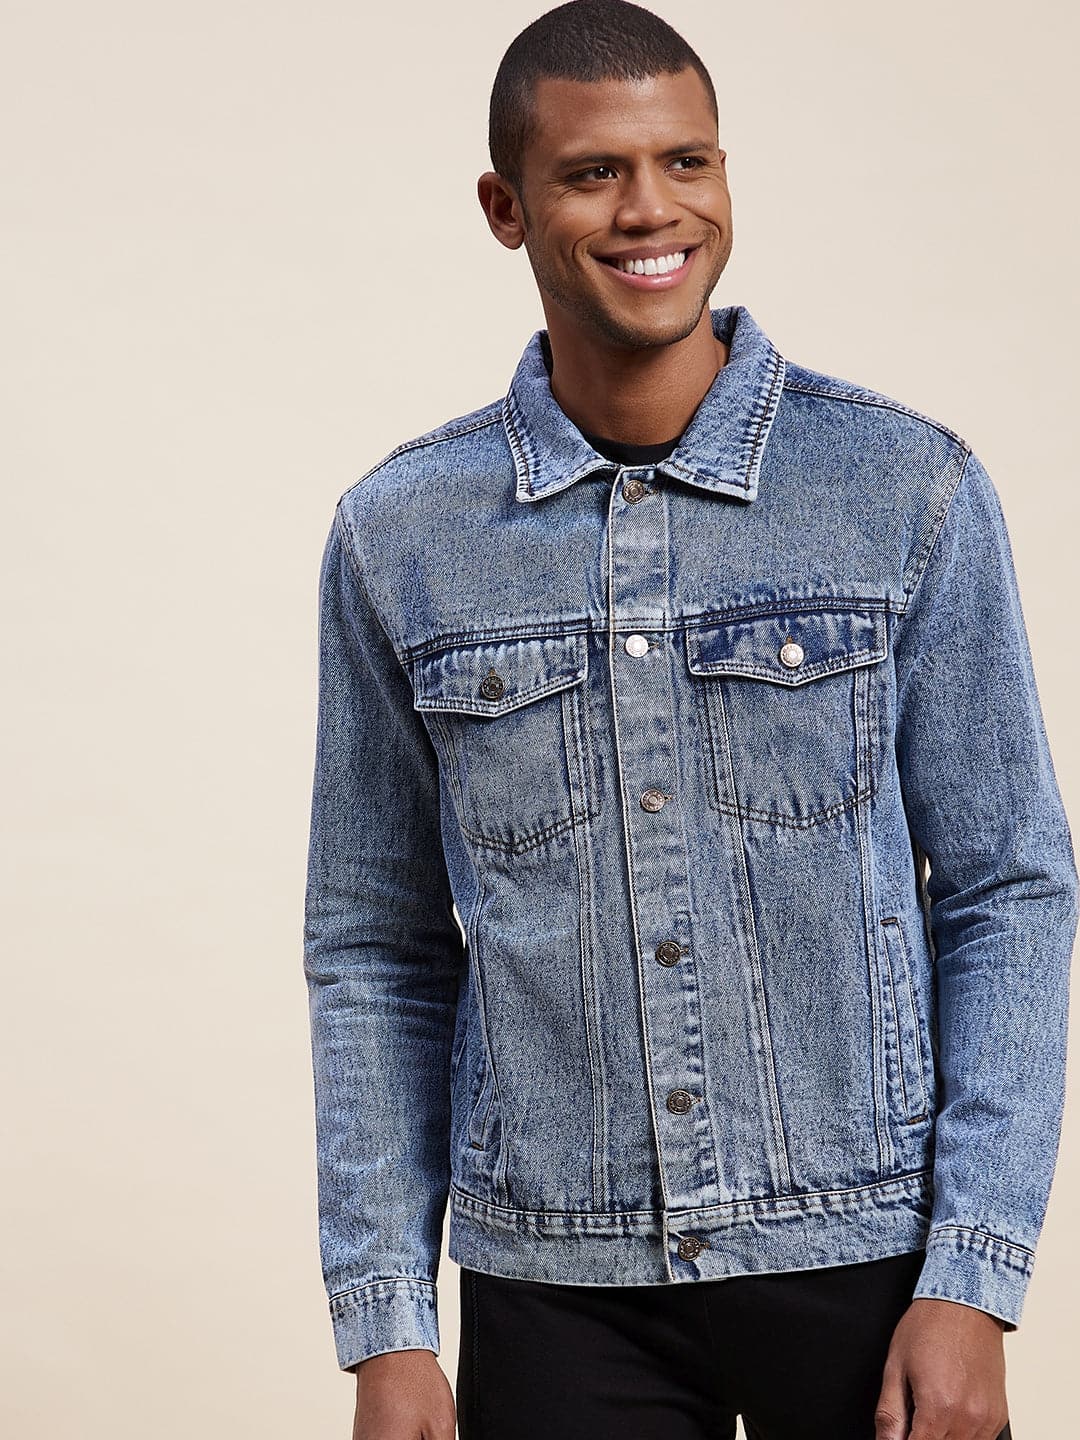 Denim Jeans Jacket Online in Nepal | Shop More from Choicemanu